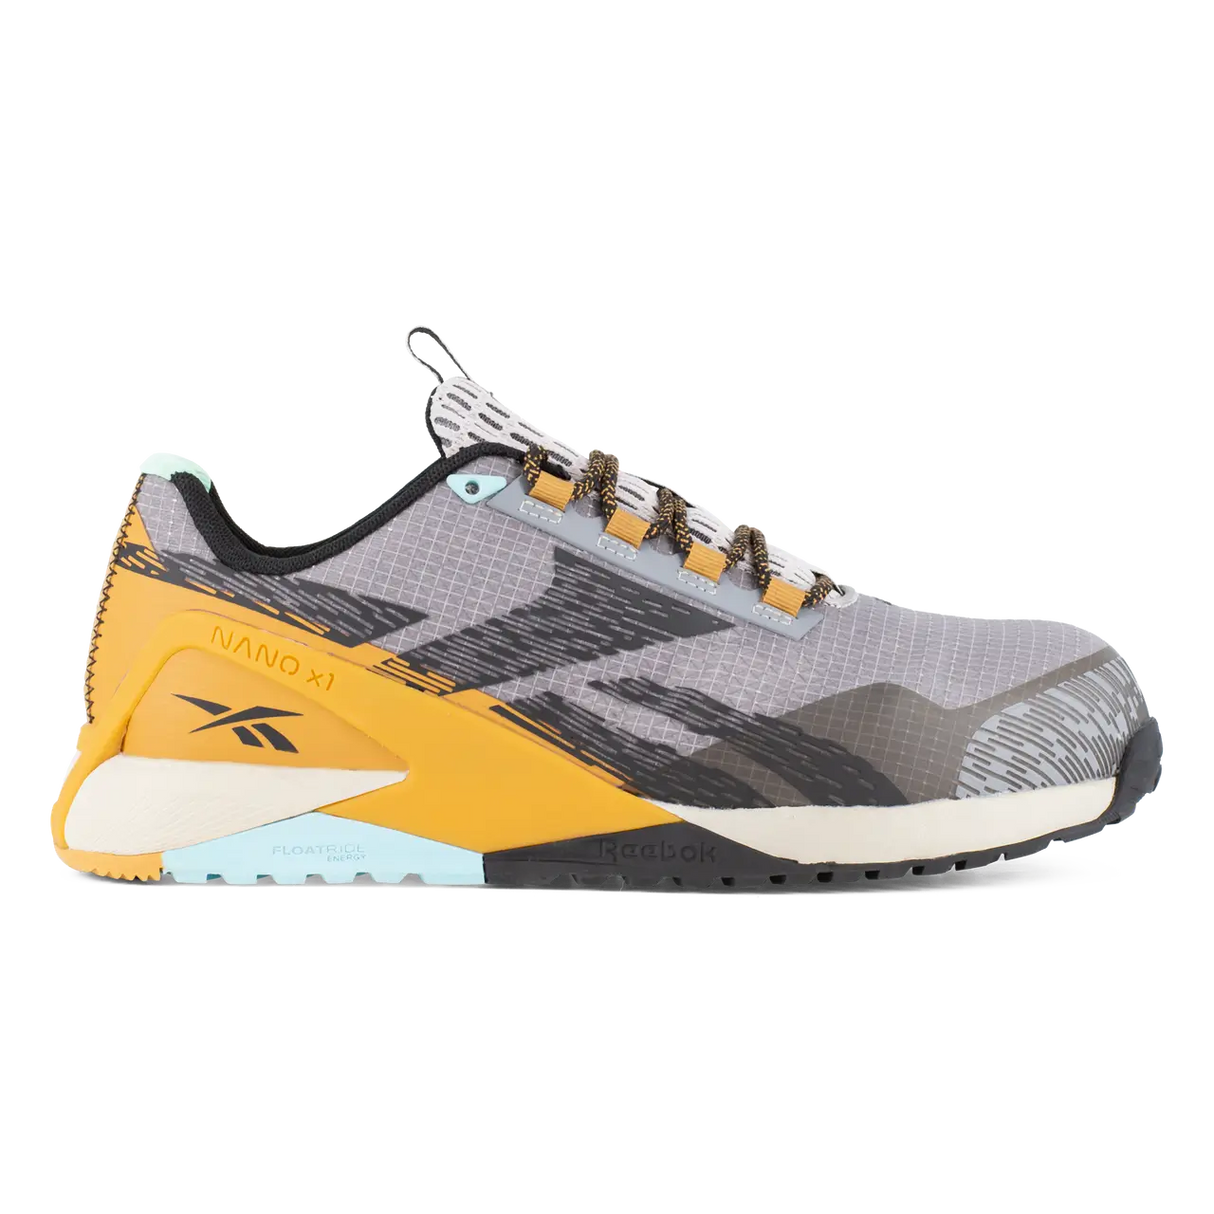 Reebok Nano X1 Adventure Work Athletic Composite Toe Silver, Grey, Clay, and Black RB348 side view